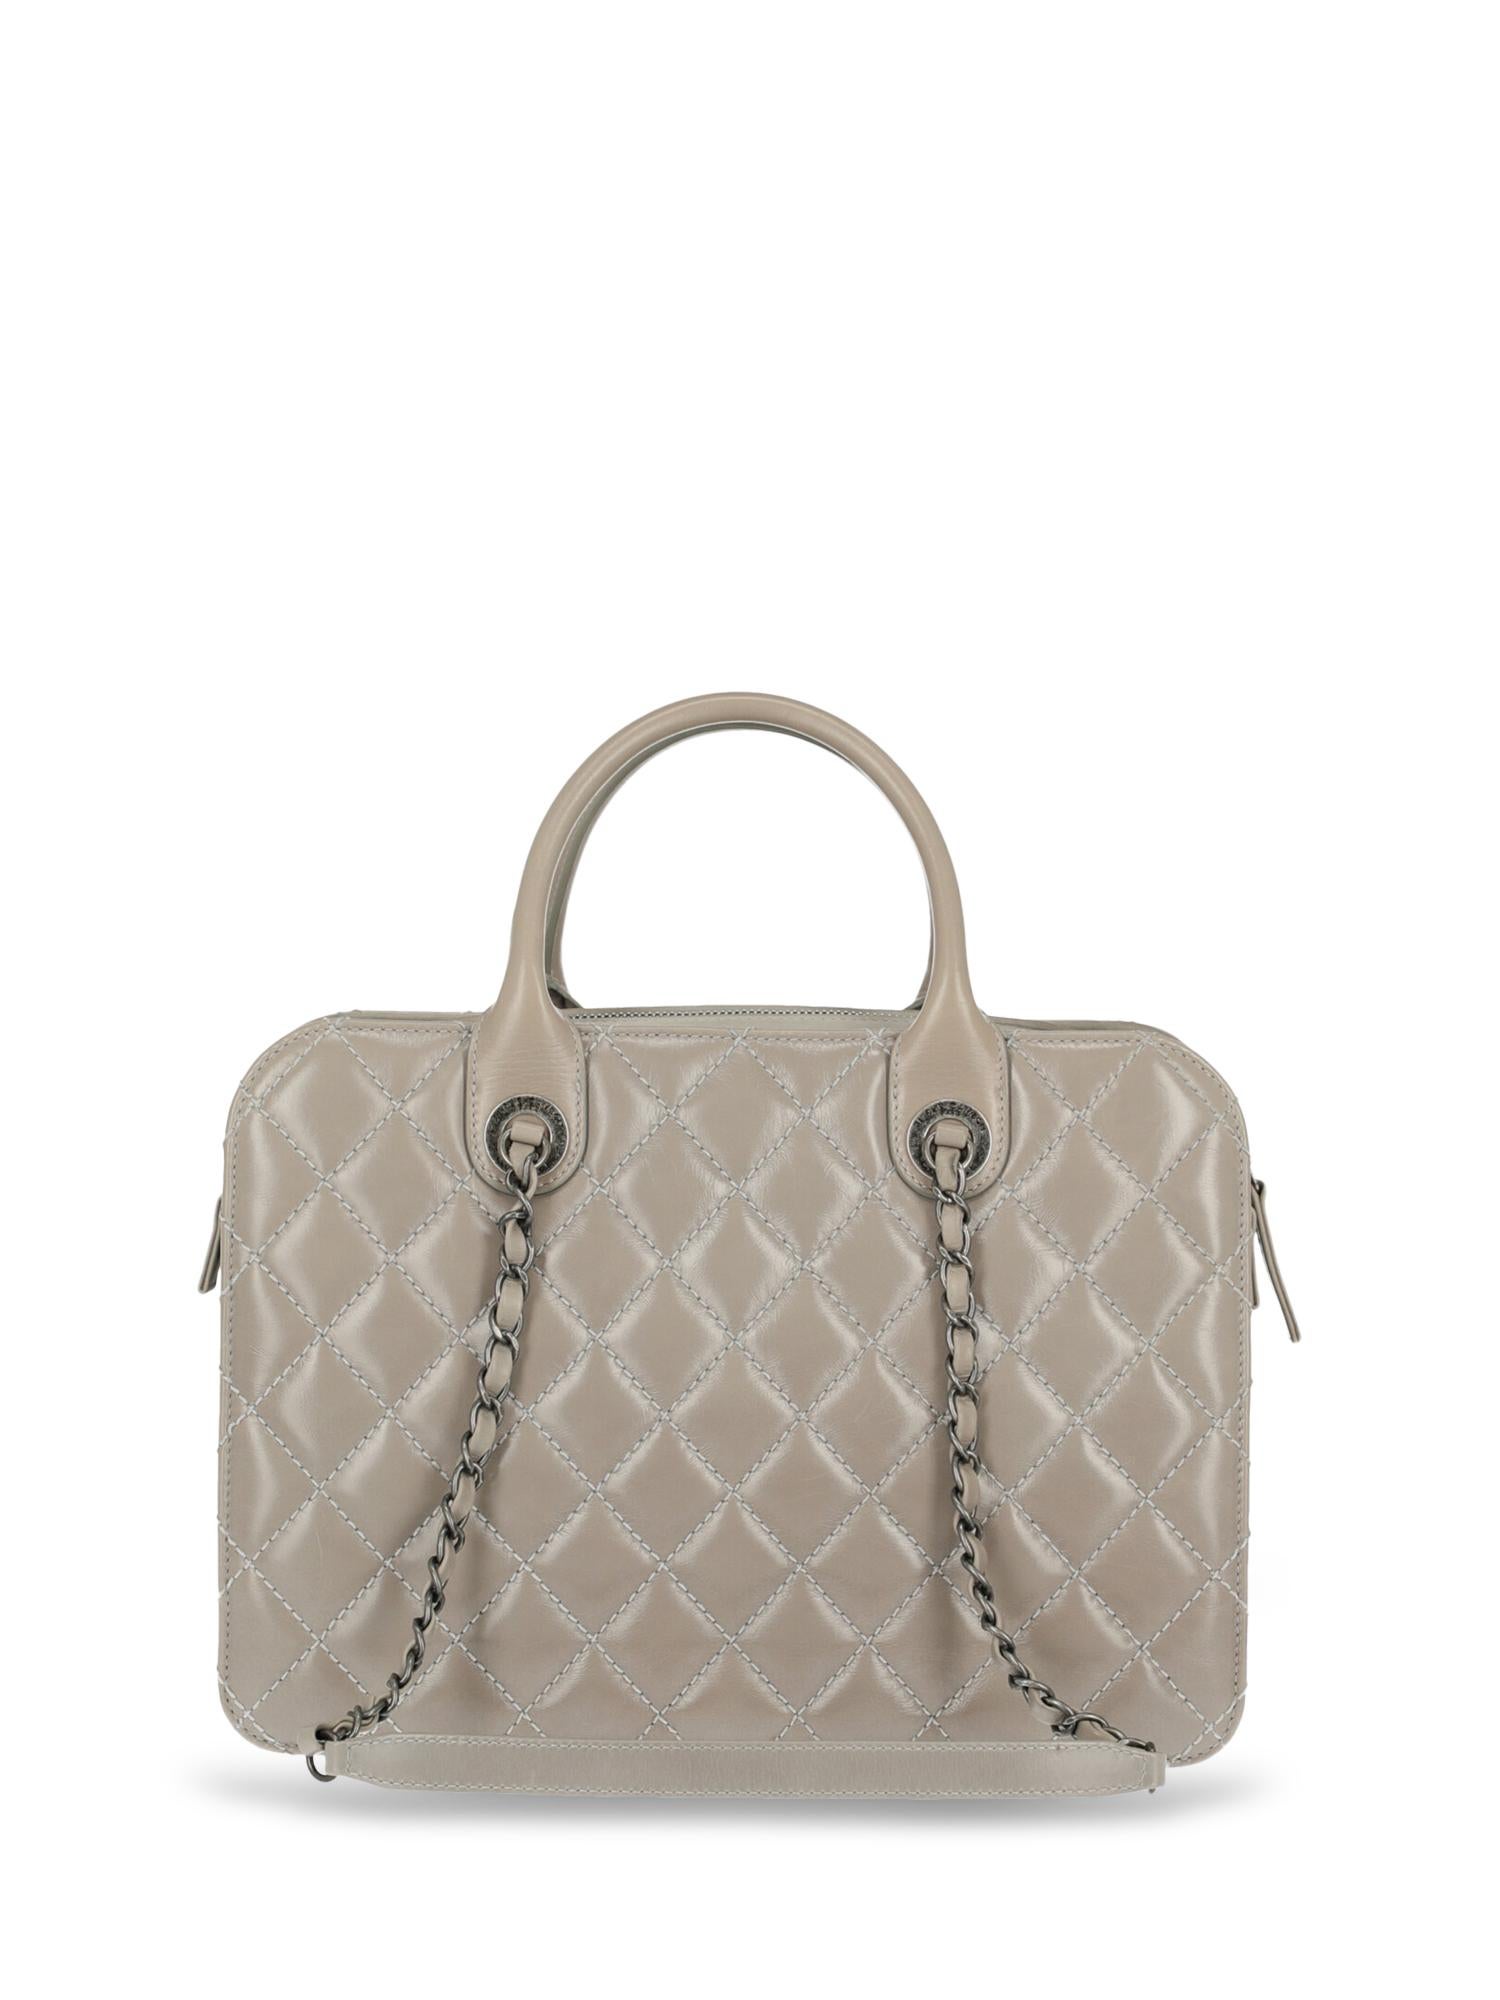 Chanel Woman Shoulder bag Grey  In Good Condition For Sale In Milan, IT